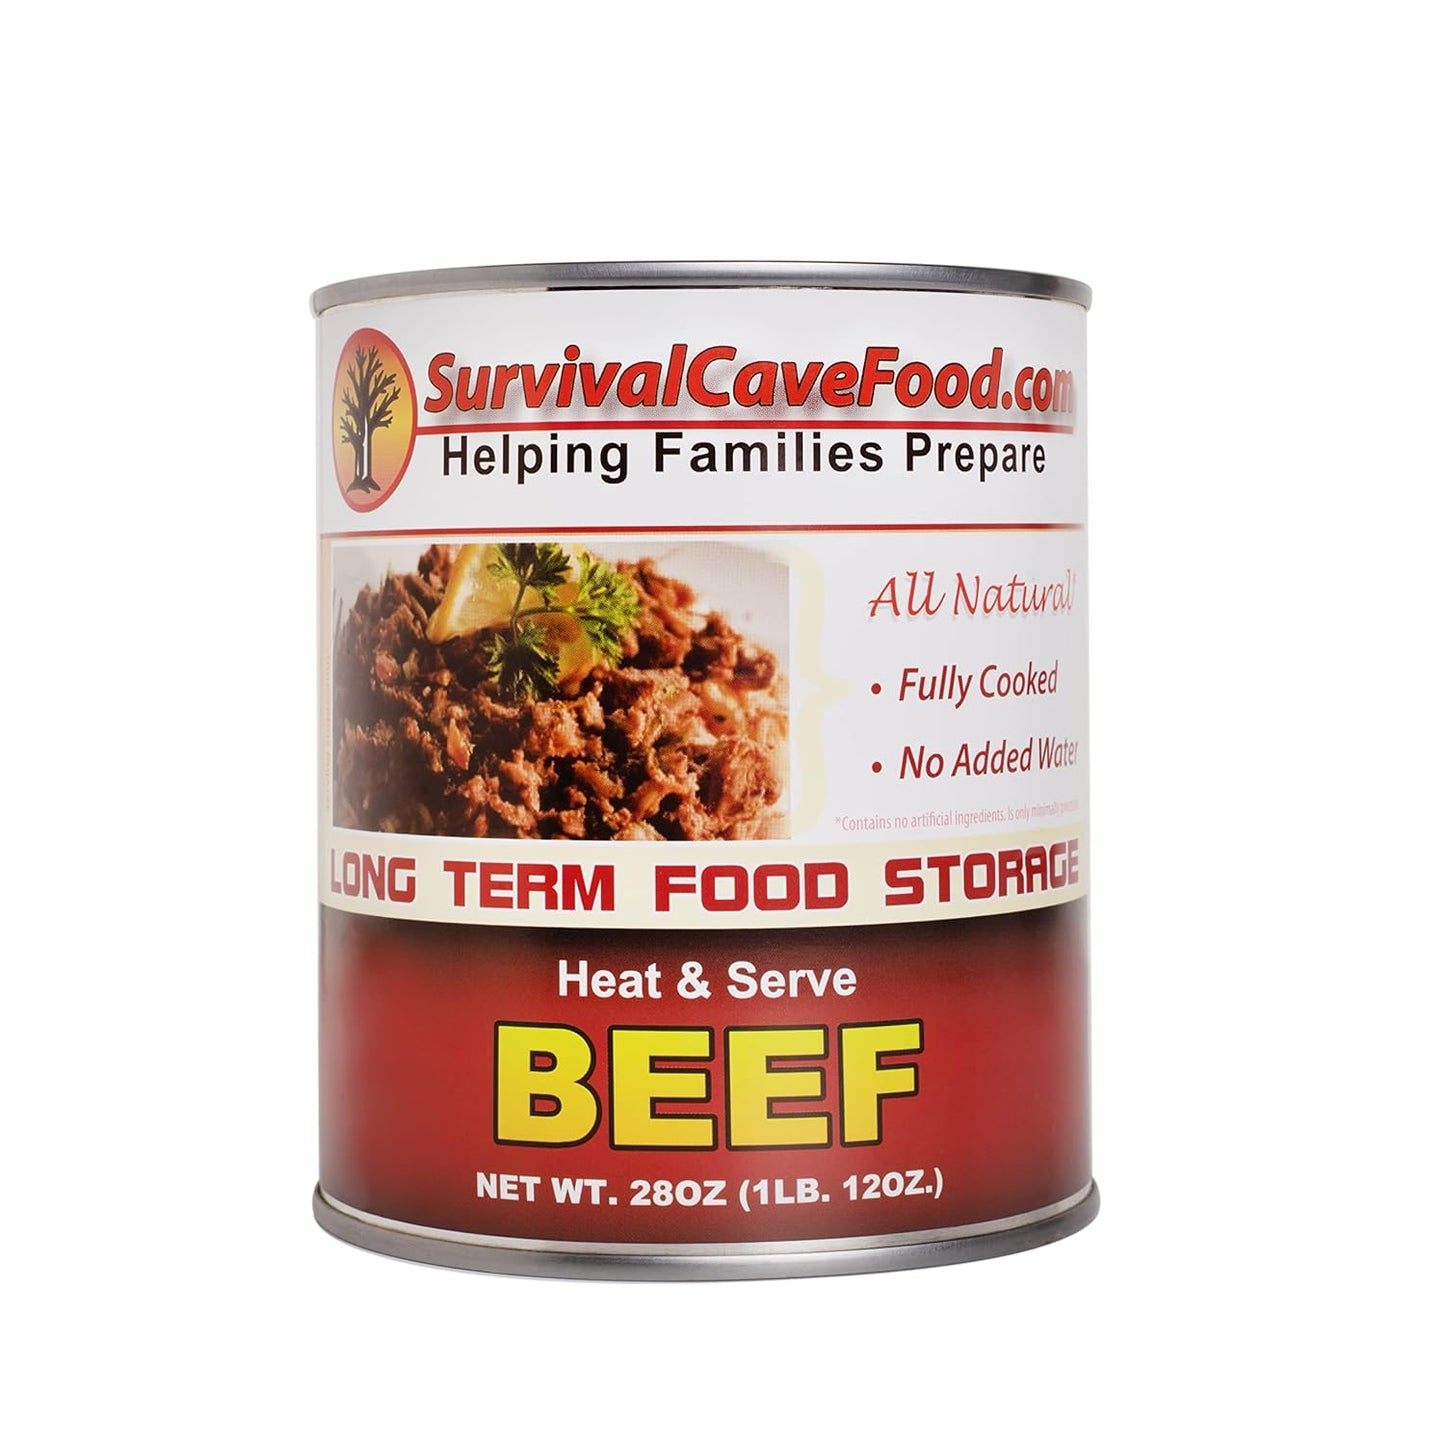 Survival Cave Canned Beef - 28oz can (FULL CASE)